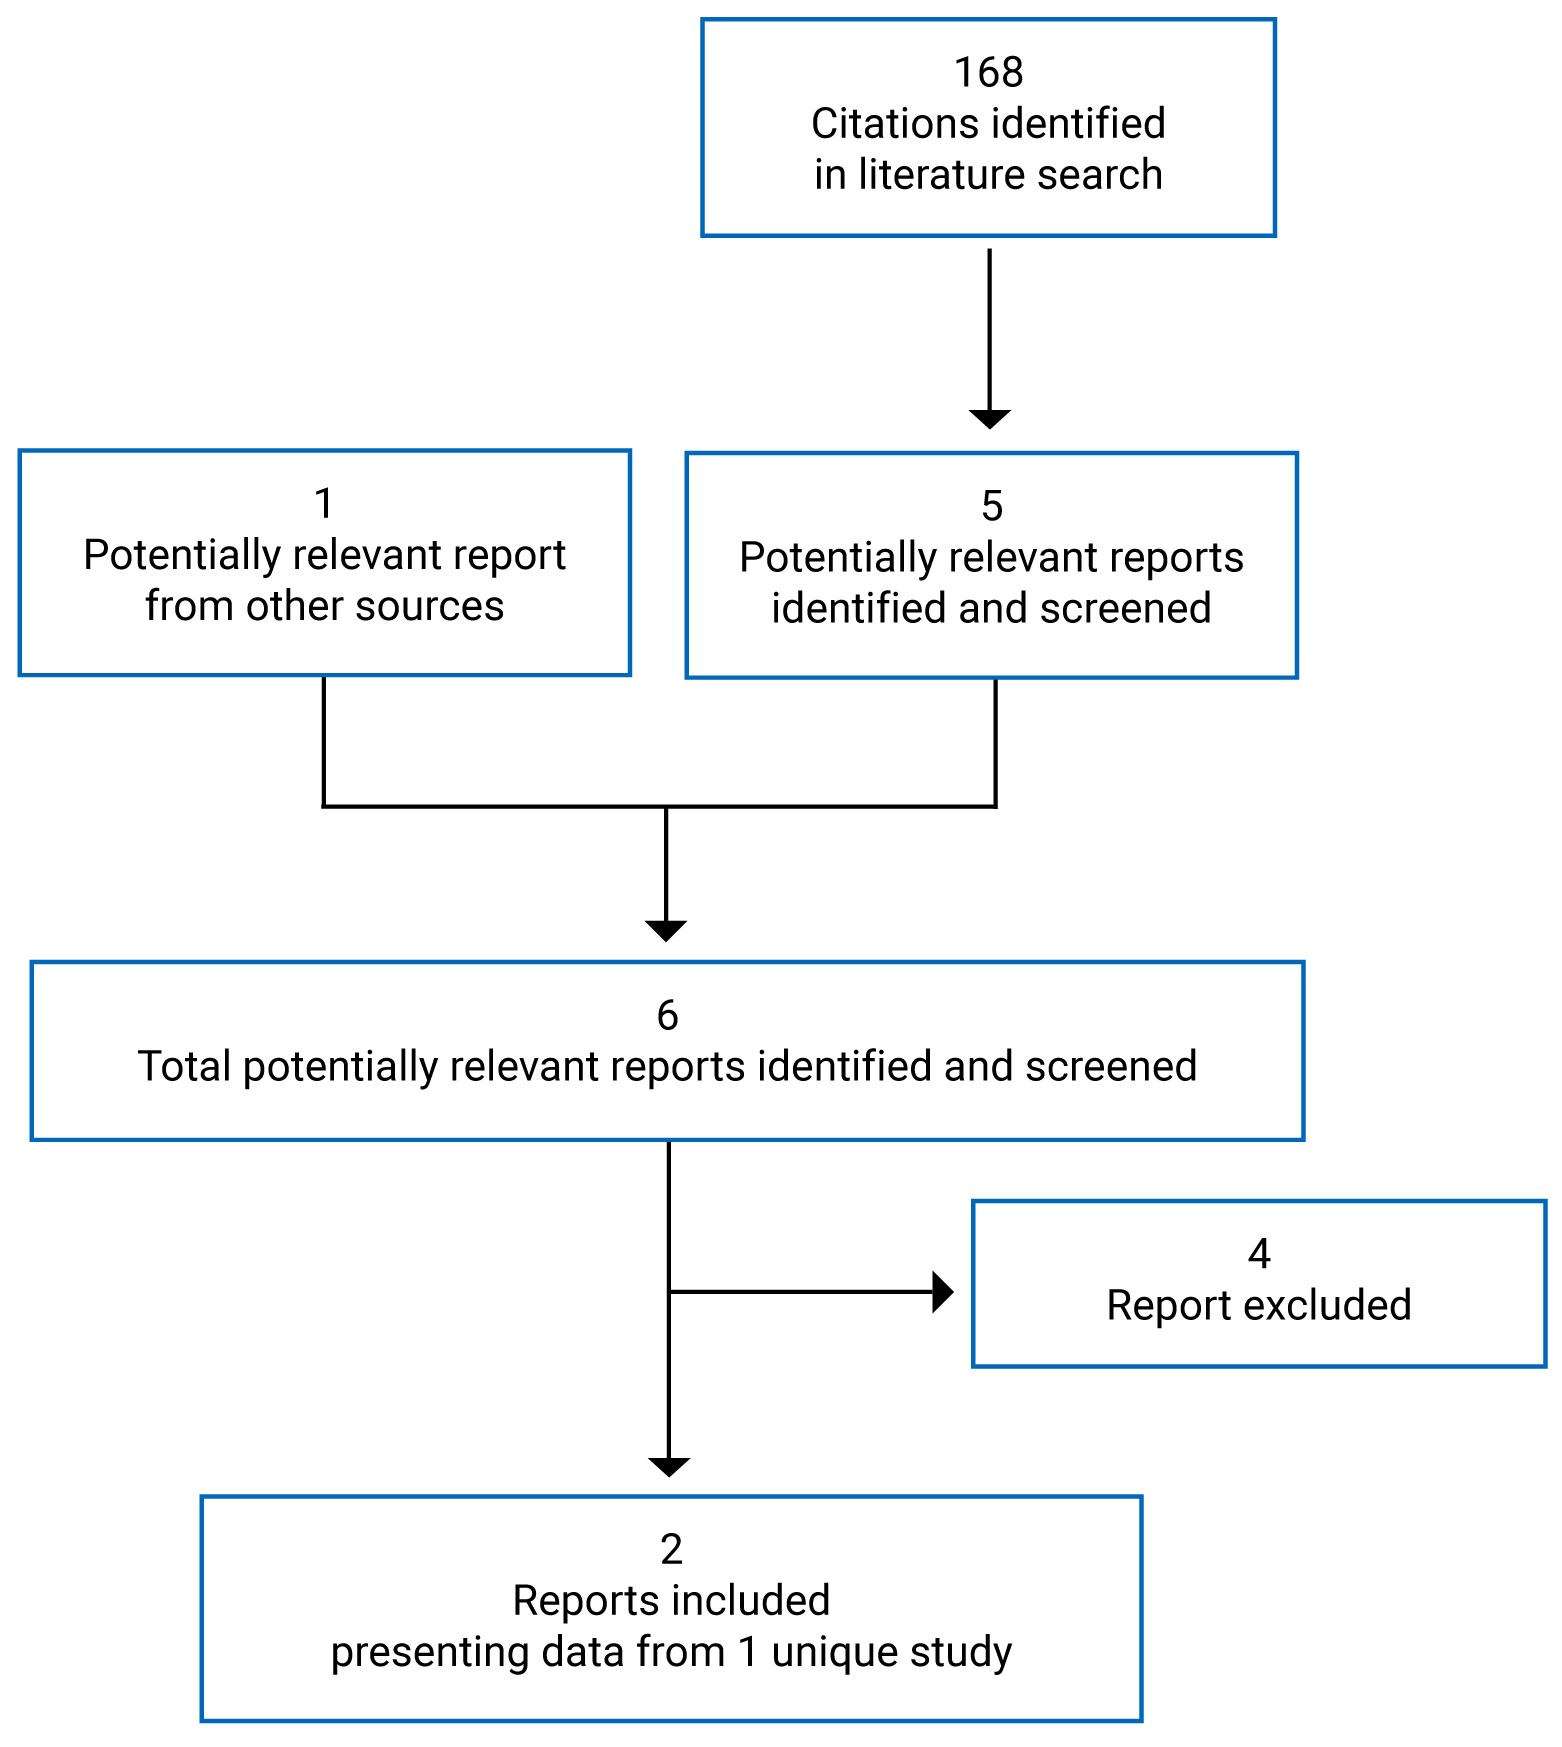 A total of 168 citations were identified. Five potentially relevant full-text reports were retrieved for scrutiny. One potentially relevant report was identified from other sources. Among the 6 full-text reports screened, 4 reports were excluded. In total, 2 reports representing 1 unique study are included in the review.